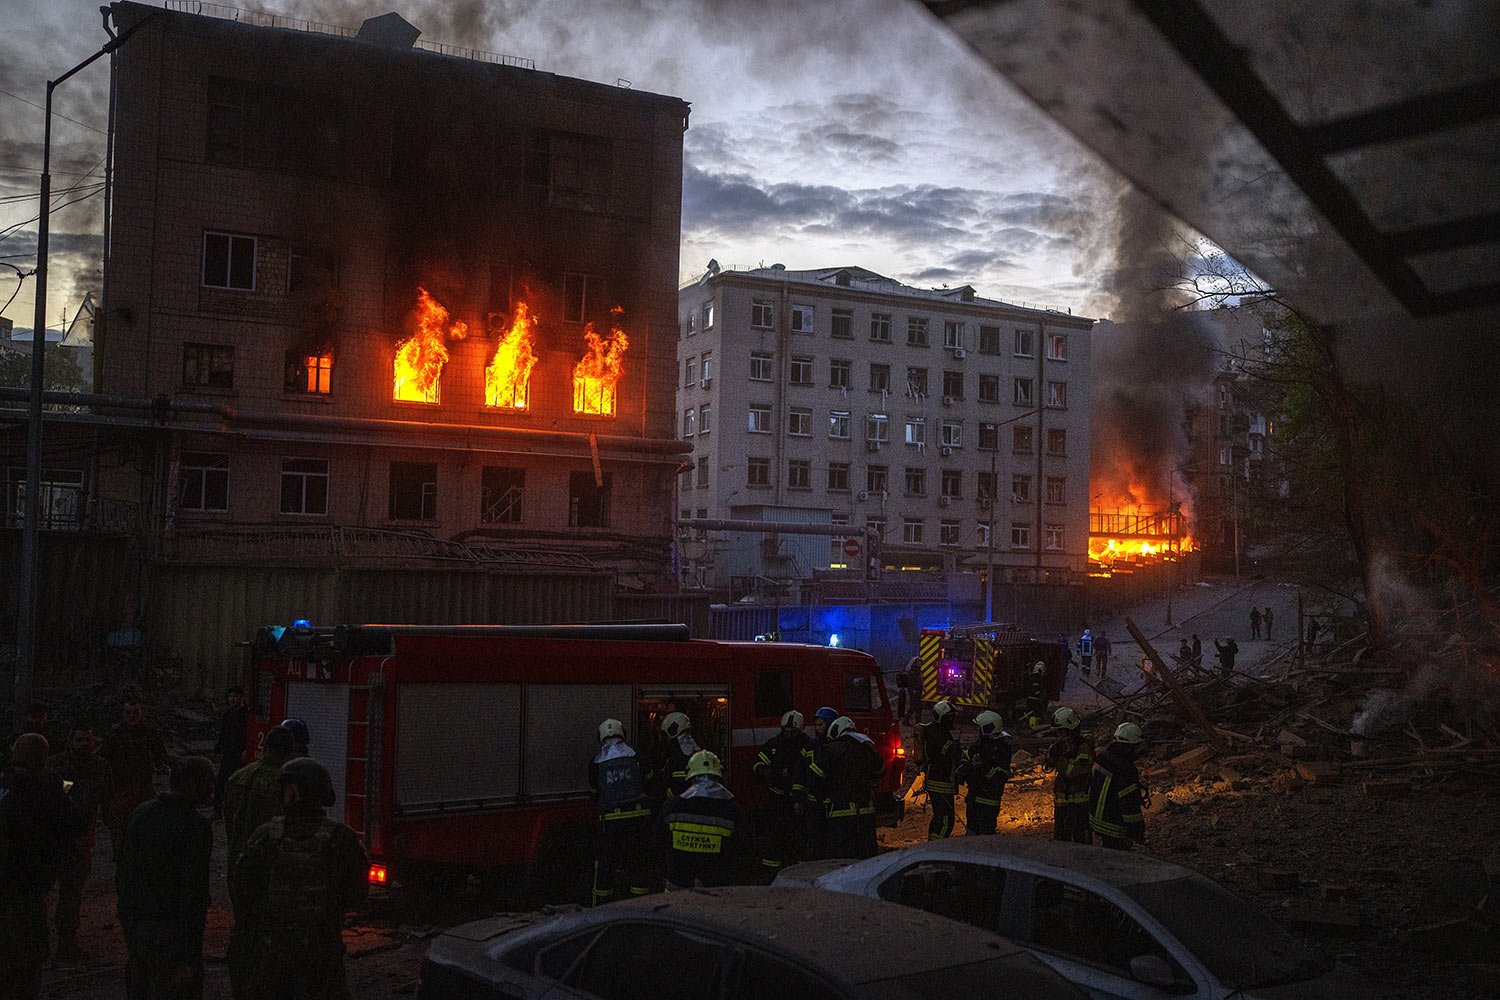  Emergency services work at the site where fires were triggered by an explosion in Kyiv, Ukraine, Thursday, April 28, 2022. Russia struck the Ukrainian capital of Kyiv shortly after a meeting between President Volodymyr Zelenskyy and U.N. Secretary-G